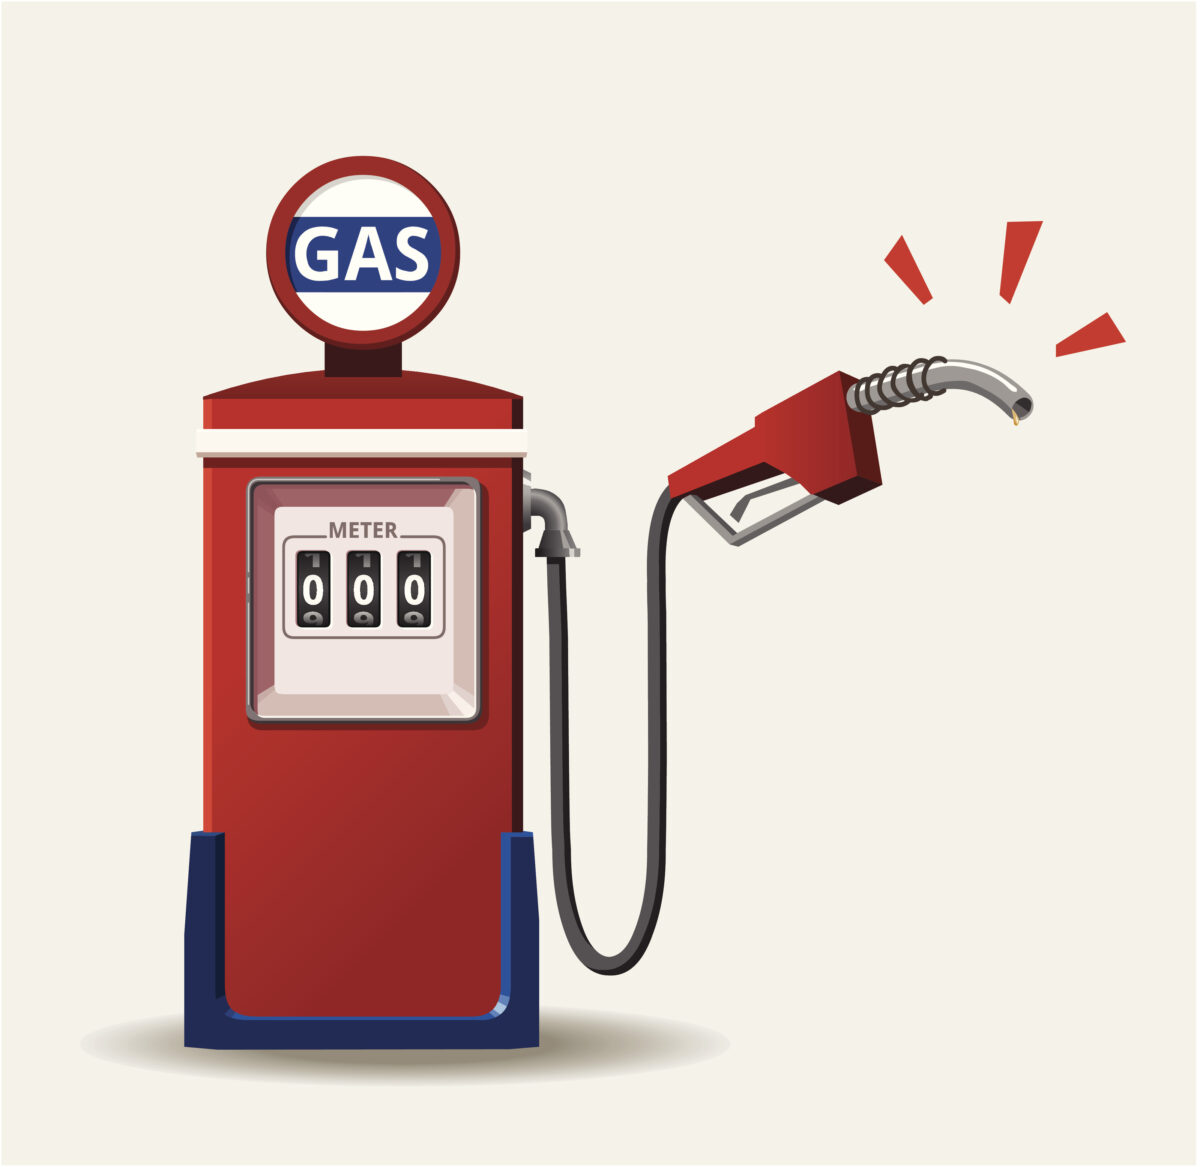 california-gas-prices-explained-torrance-refinery